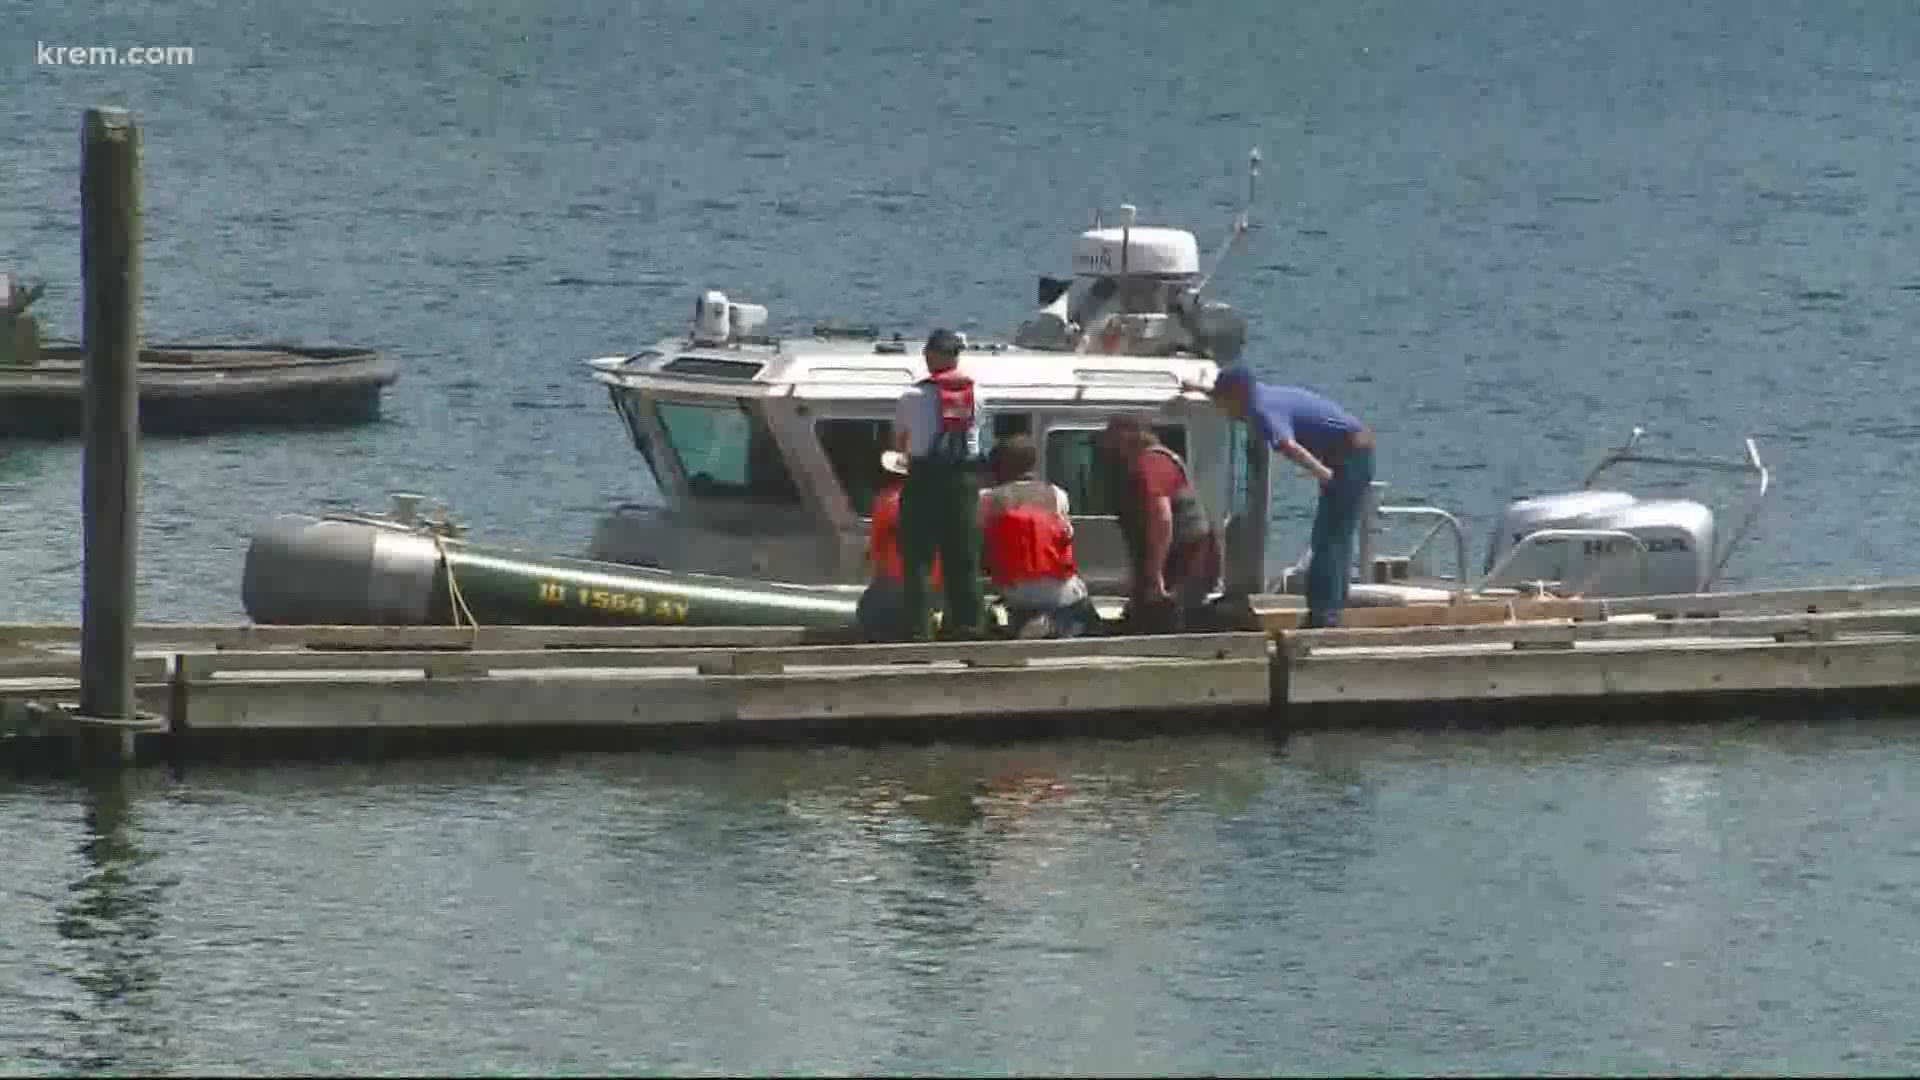 What We Know About The Lake Coeur D Alene Plane Crash Victims